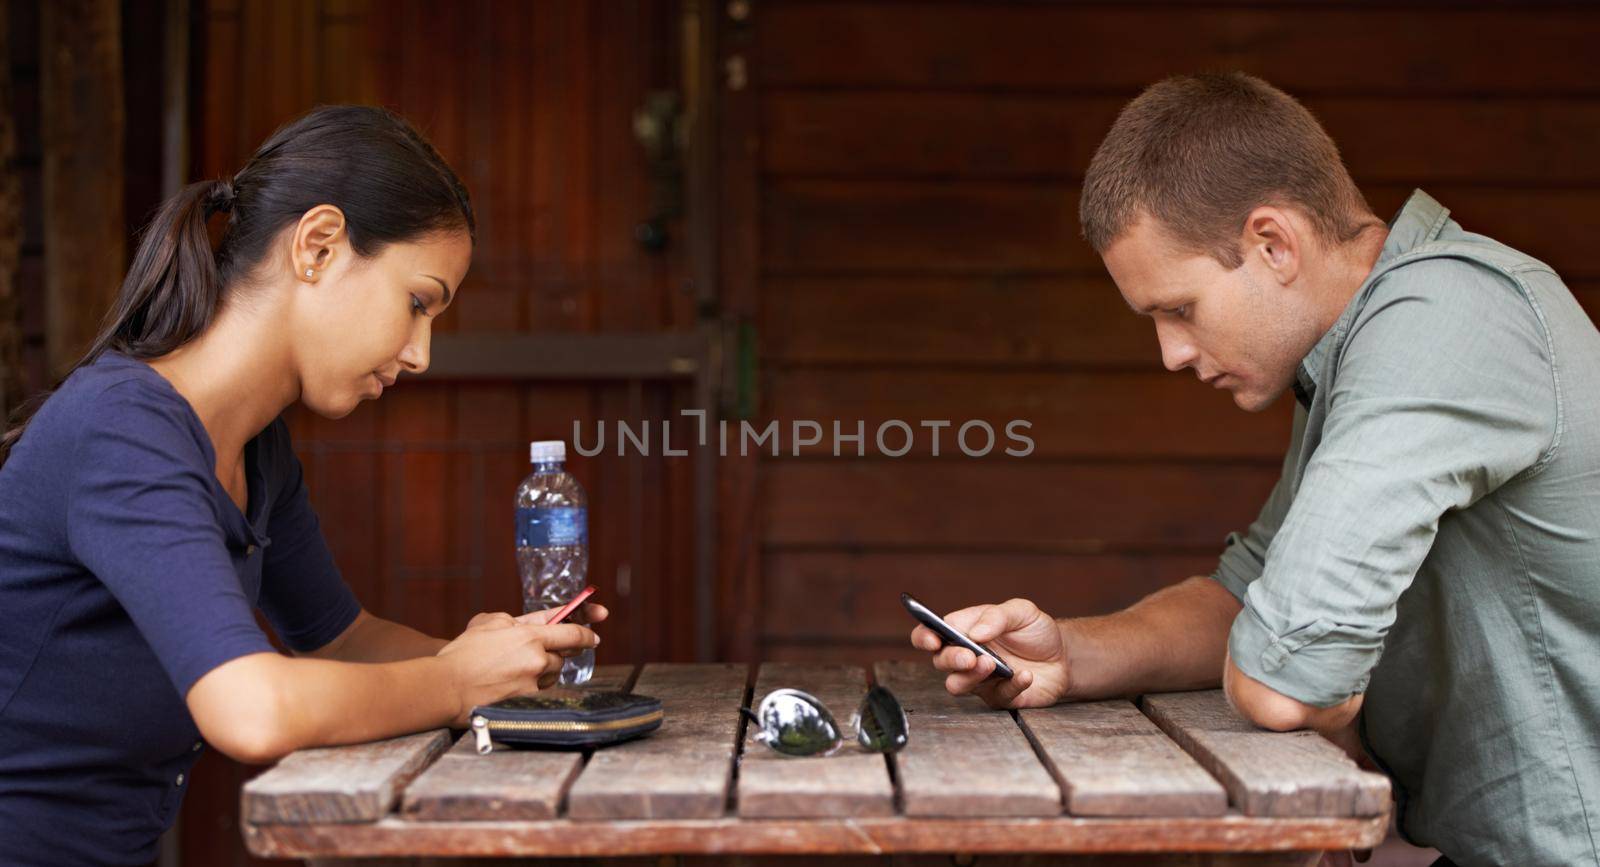 Two young adults being distracted by technology while out on a coffee date.